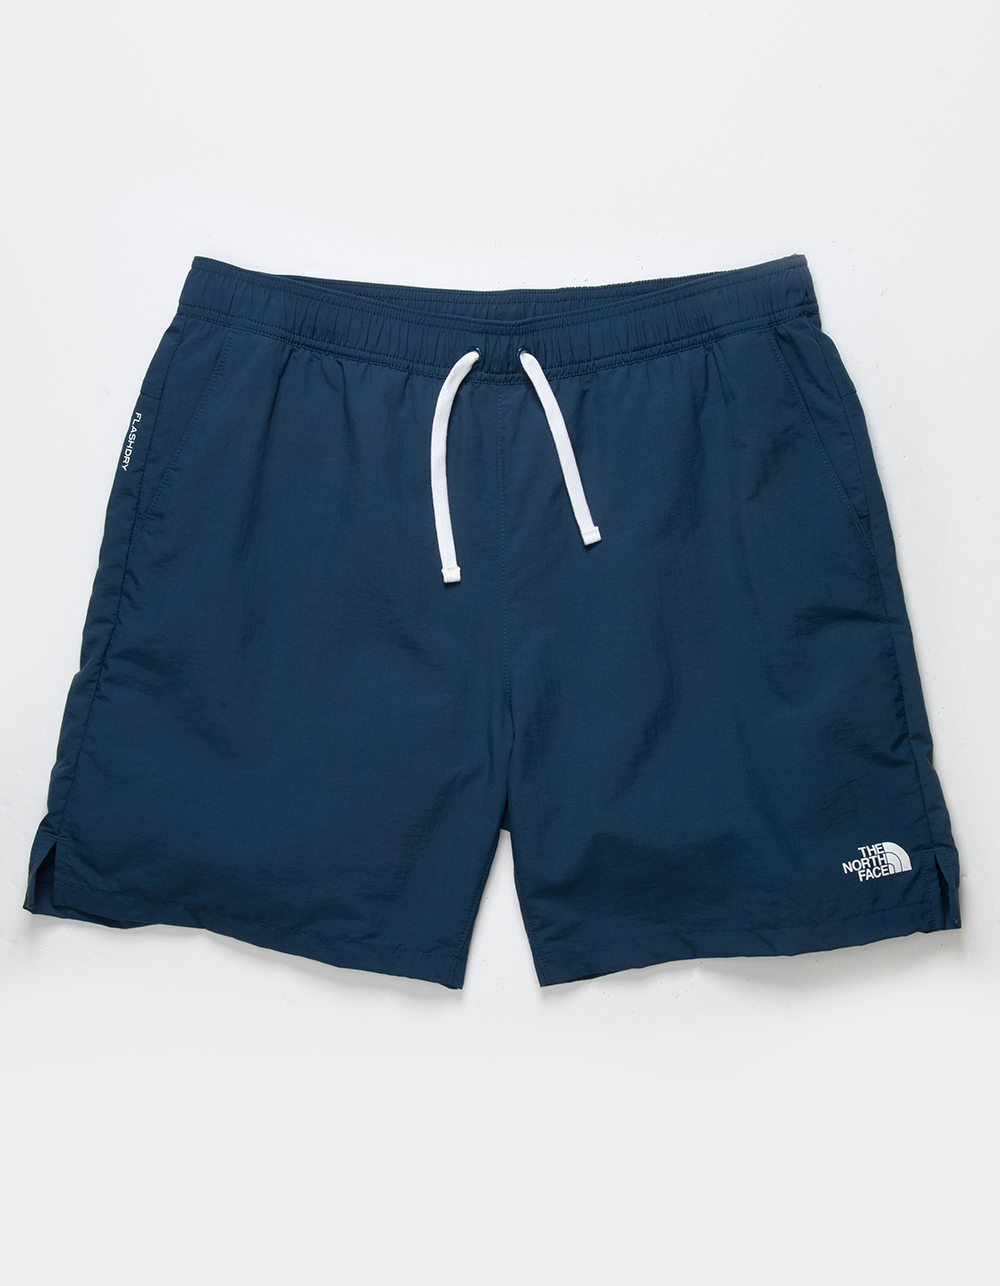 The North Face Men's Action Woven 2.0 Shorts, Large, Blue